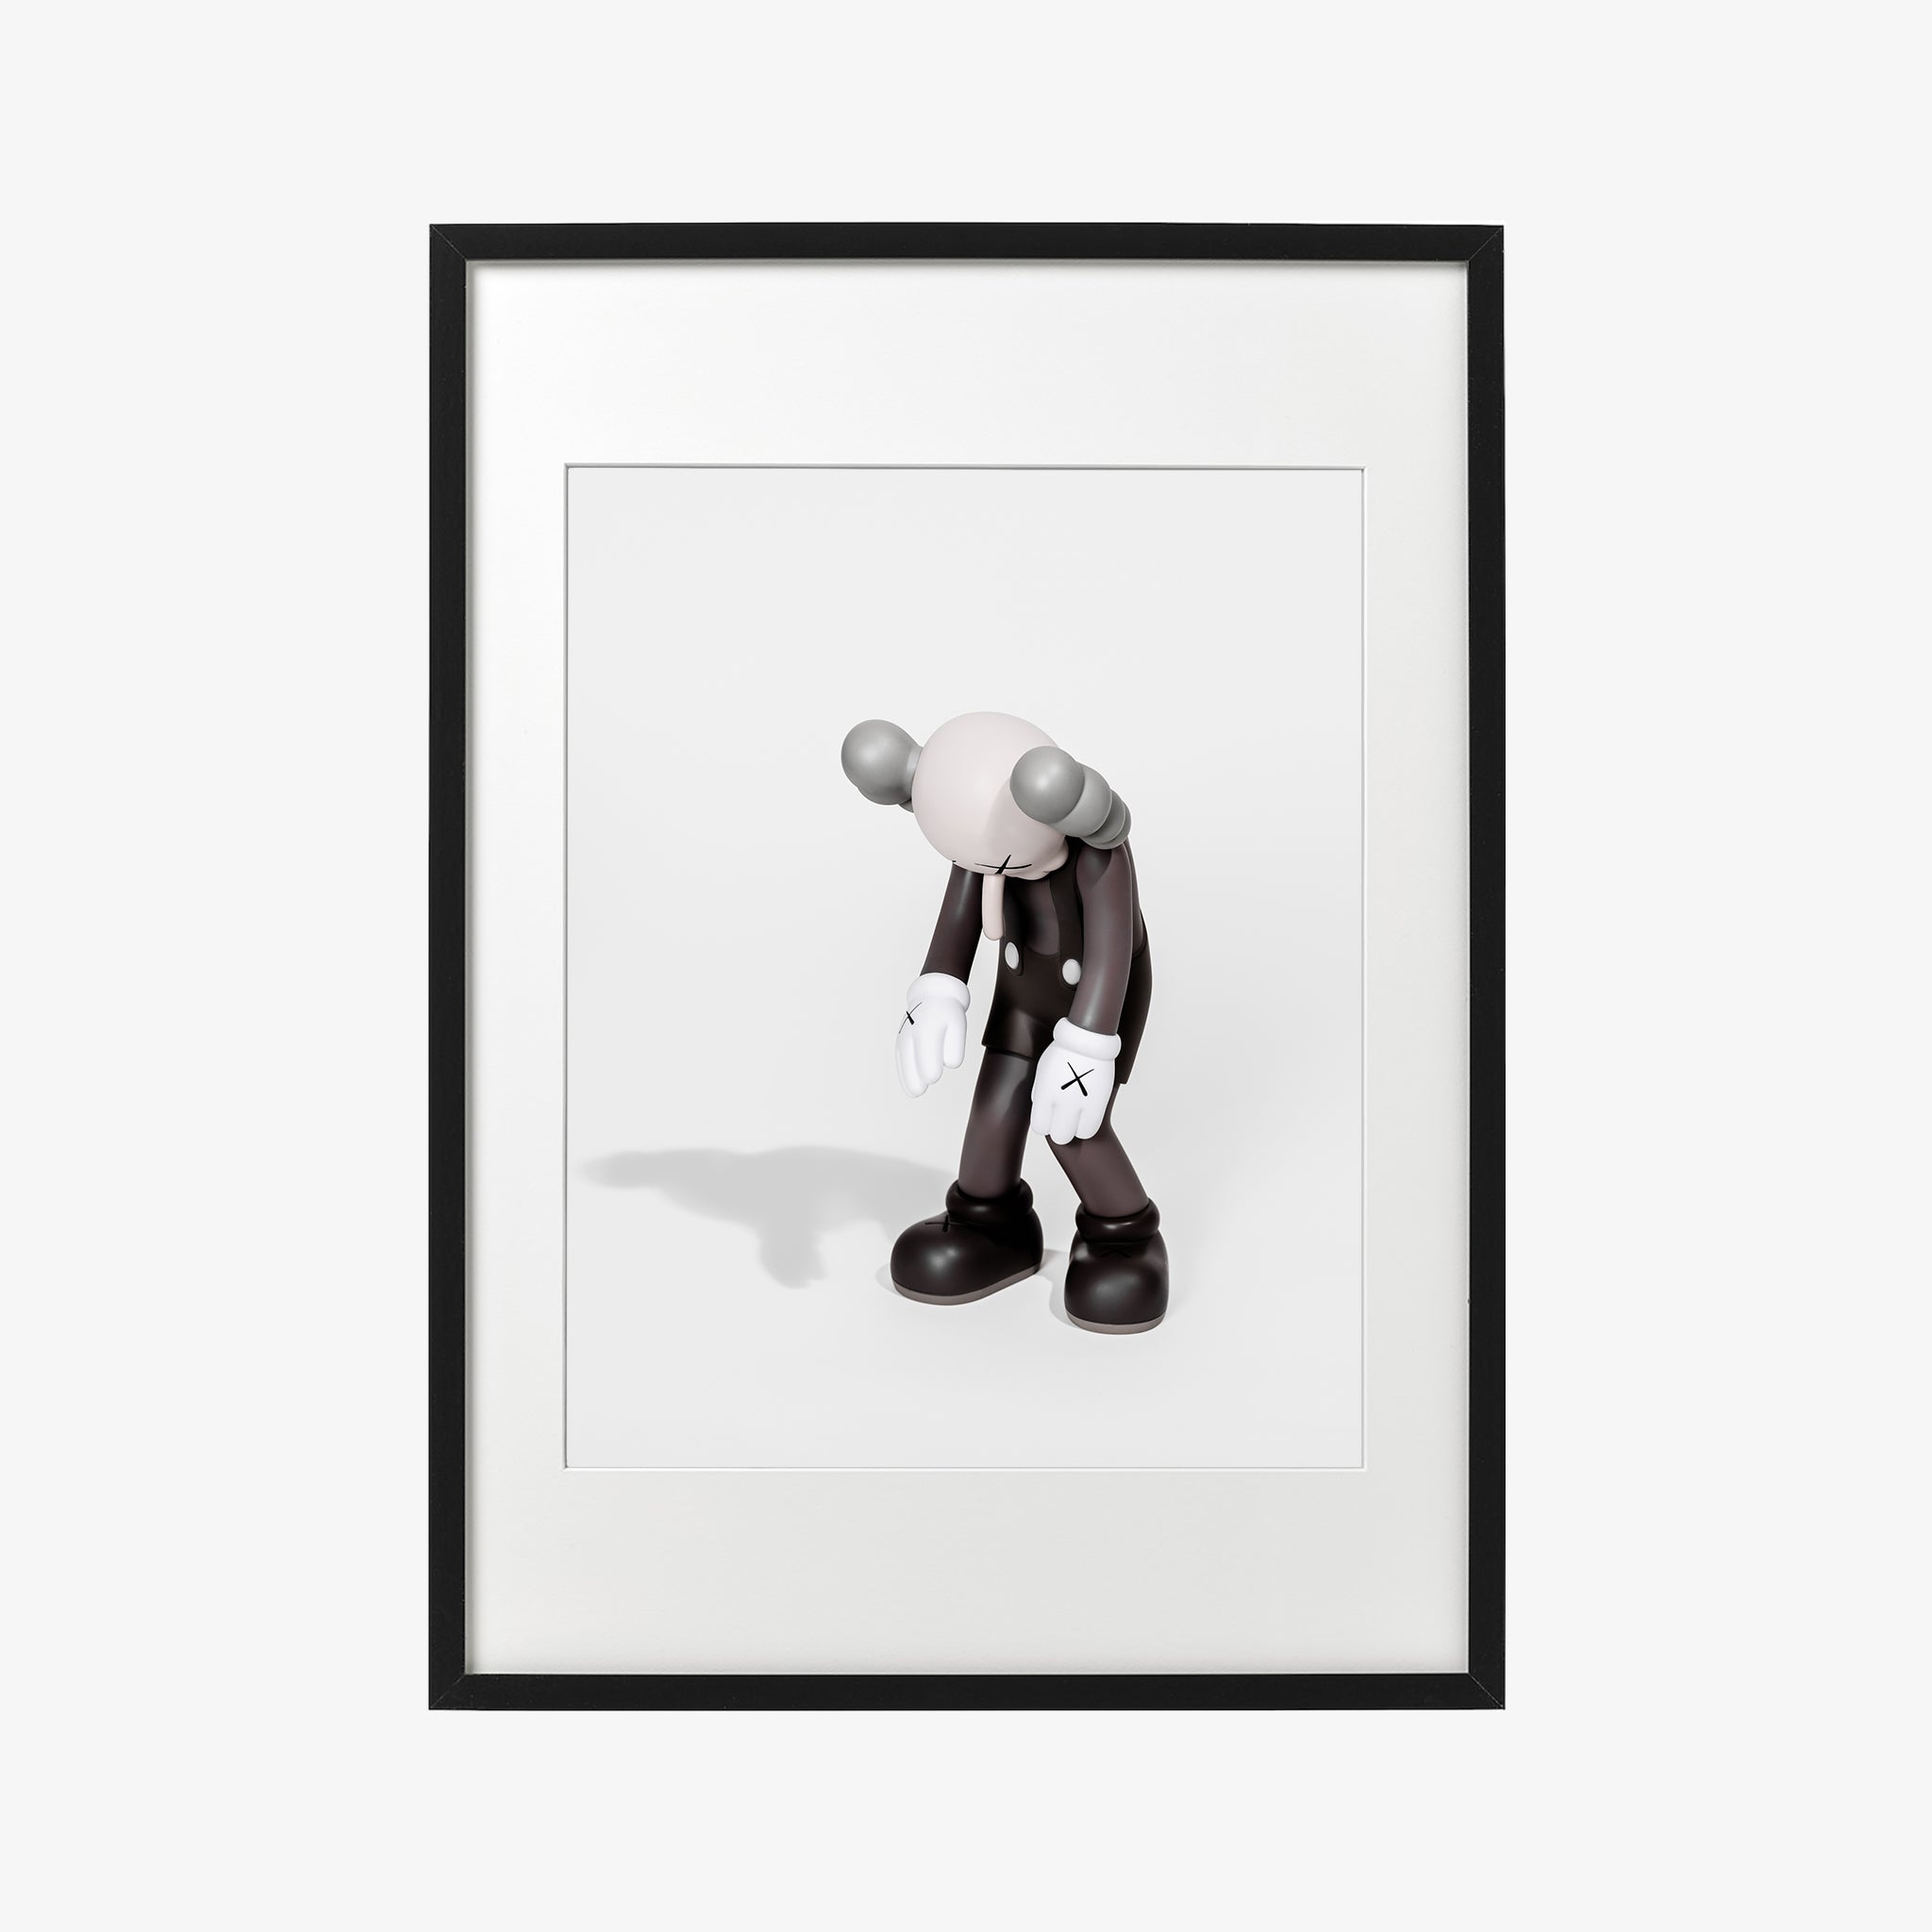 ARMOIRE'S "ART of ART" SERIES FEATURING PHOTOGRAPHS OF KAWS SMALL LIE FIGURES